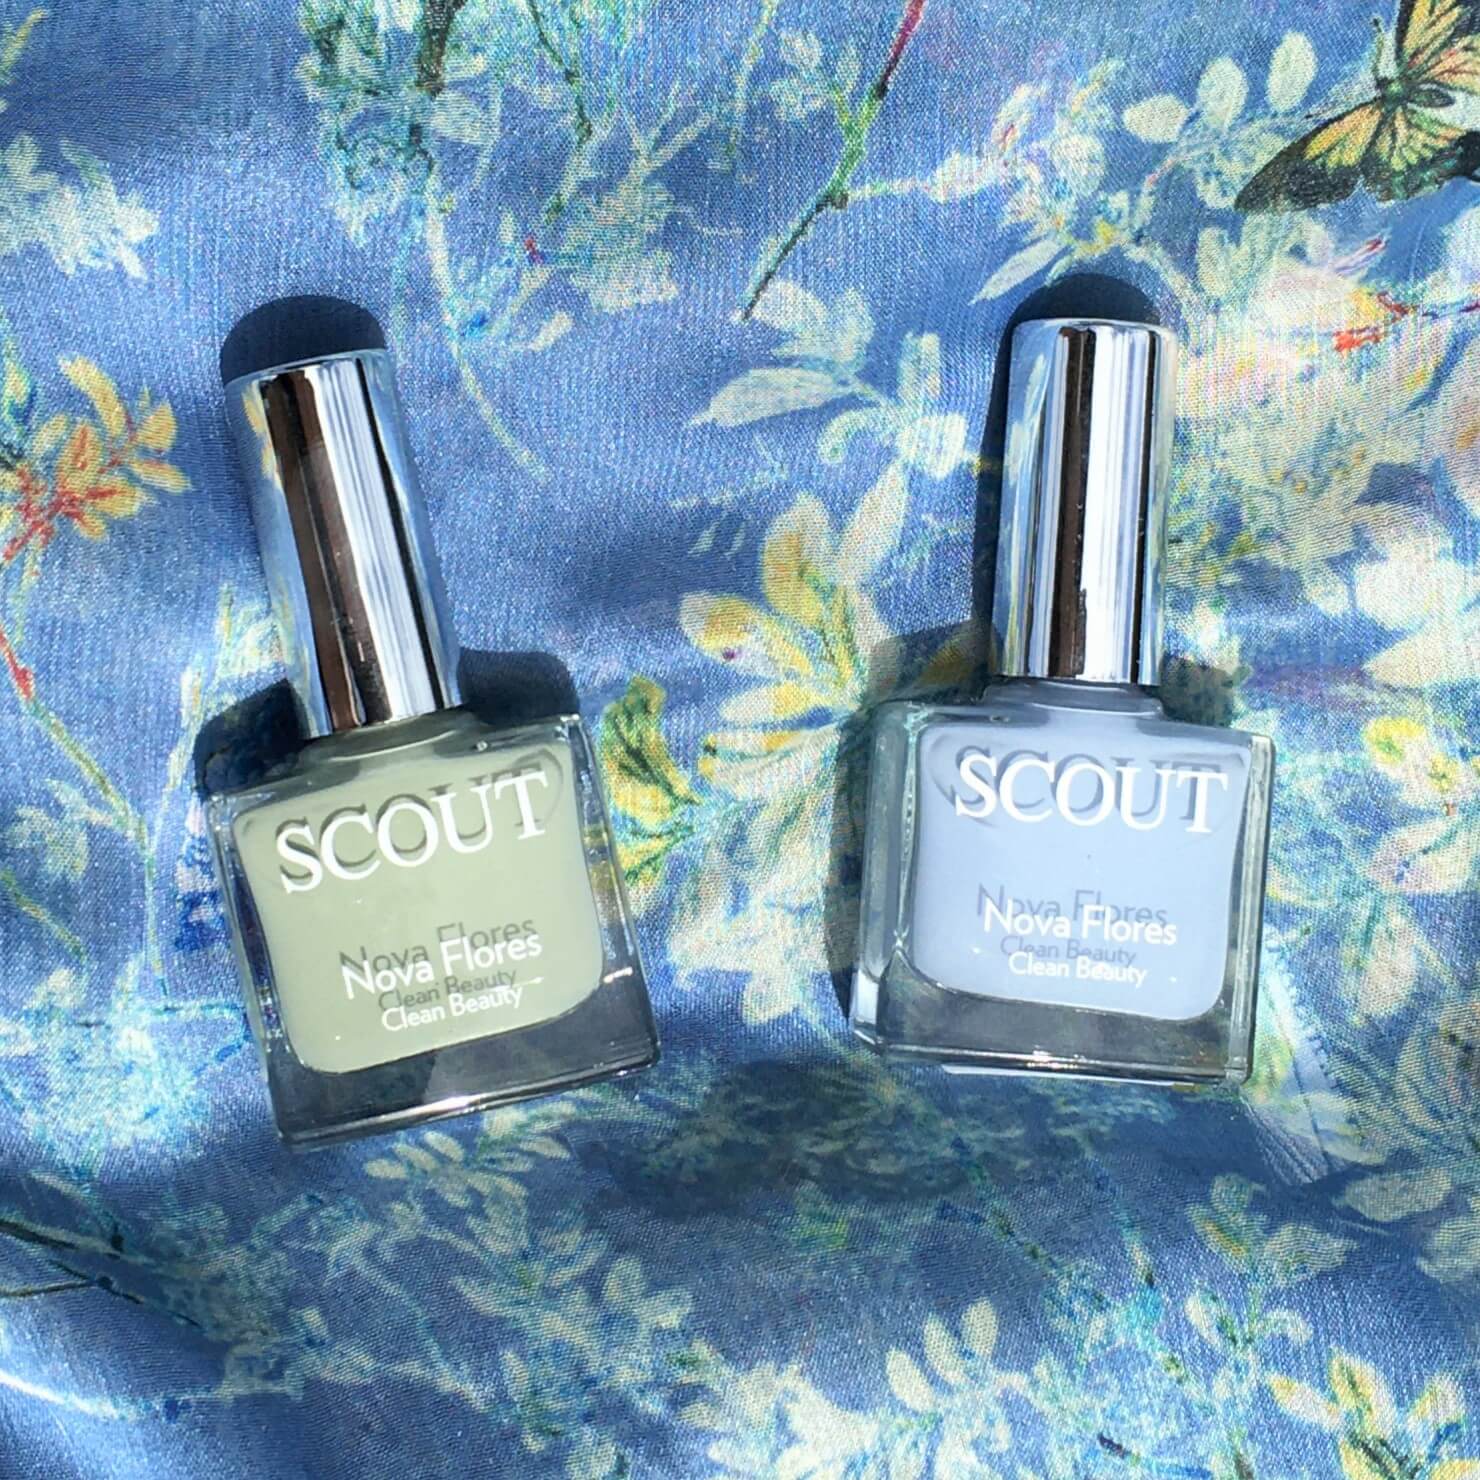 SCOUT Organic Active Beauty - New Improved Nail Polish  Formulation for Even Healthier Nails